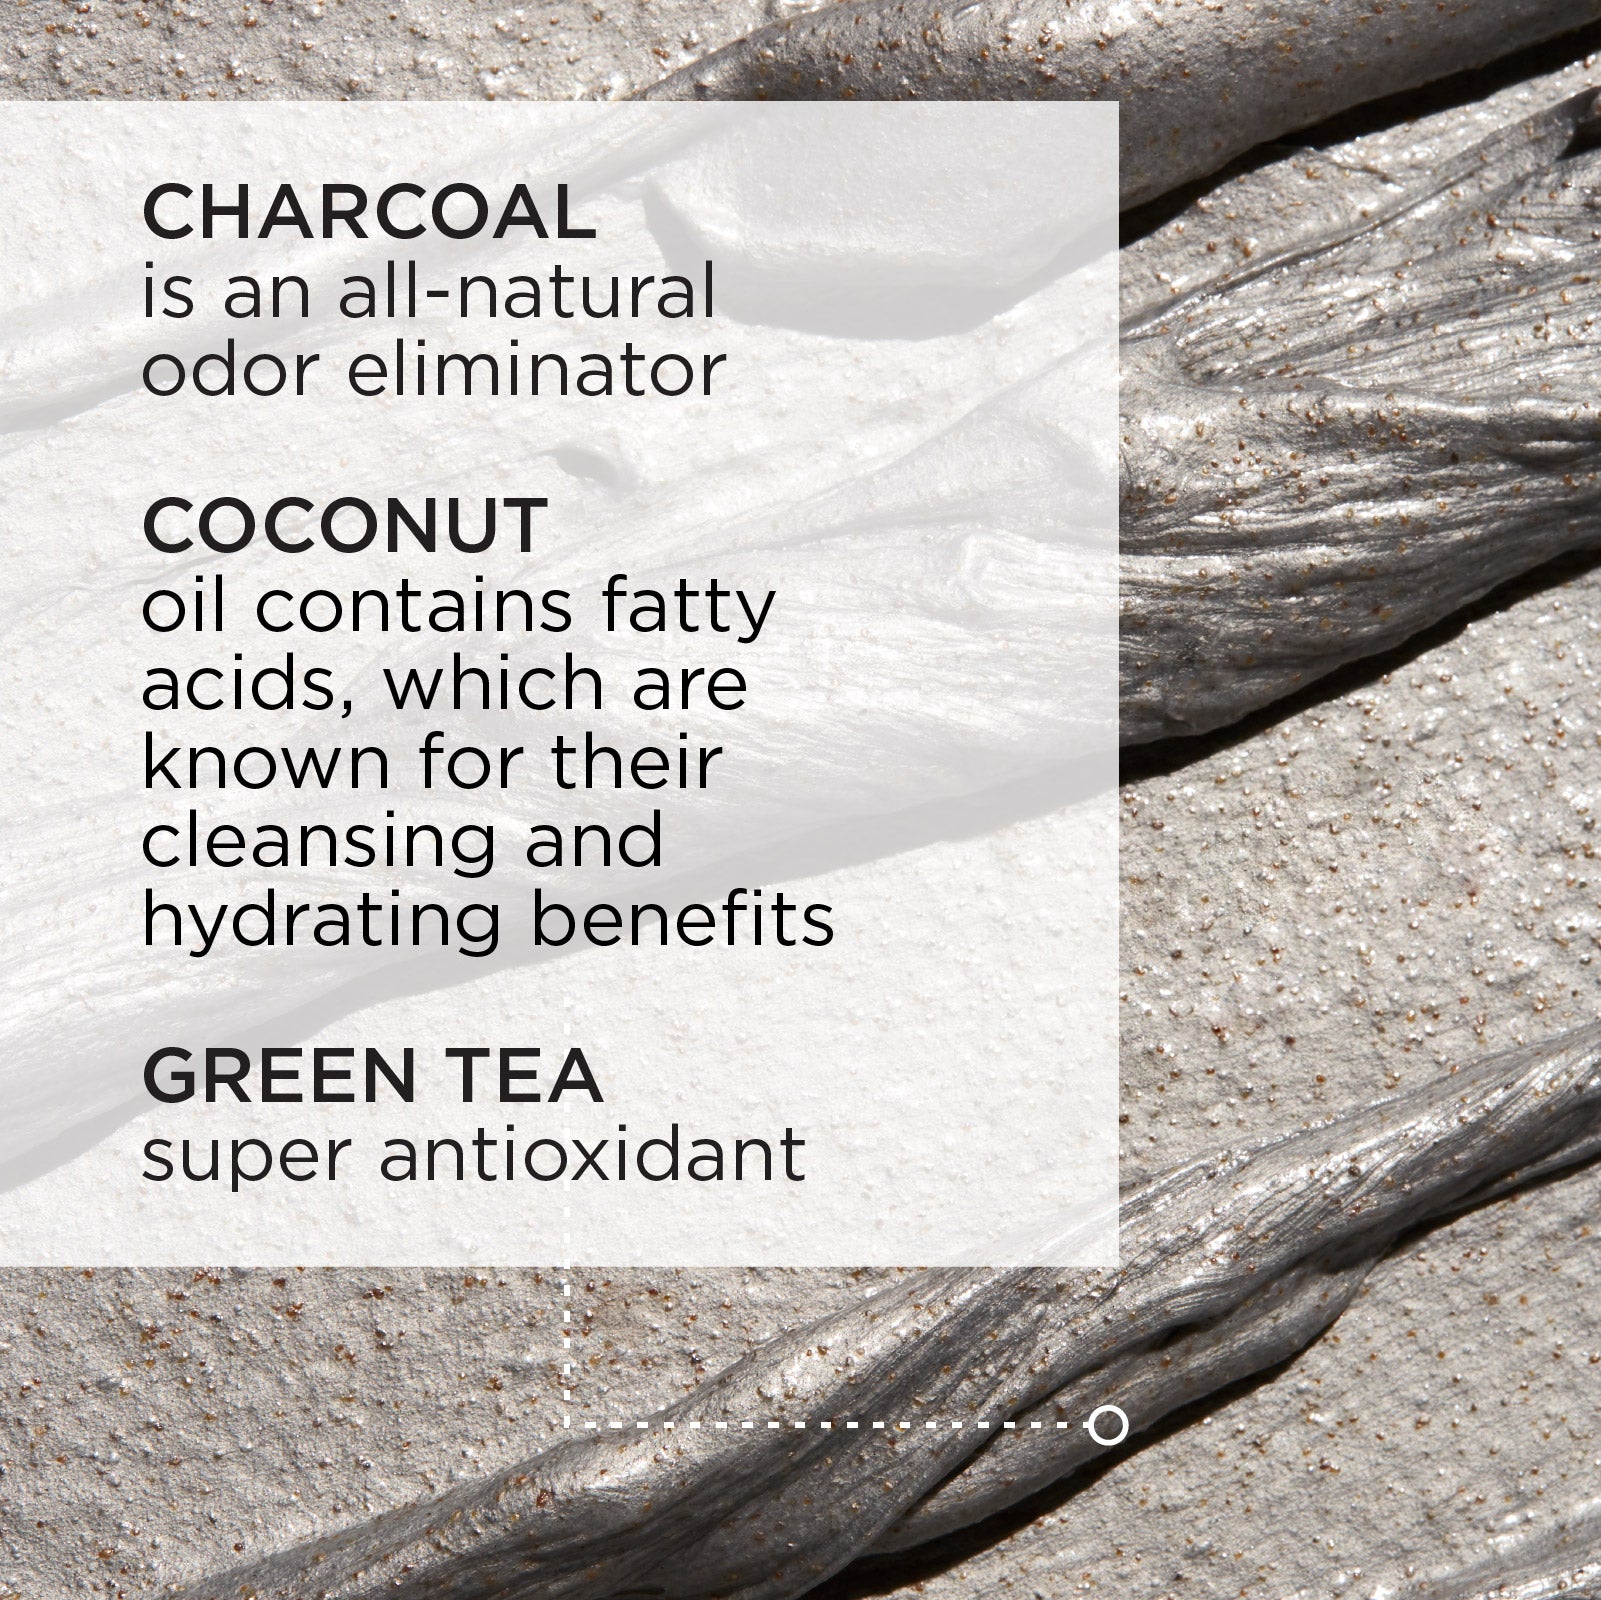 Charcoal is an all-natural odor eliminator. Coconut oil contains fatty acids, which are known for their cleansing and hydrating benefits. Green tea is a super antixoidant.